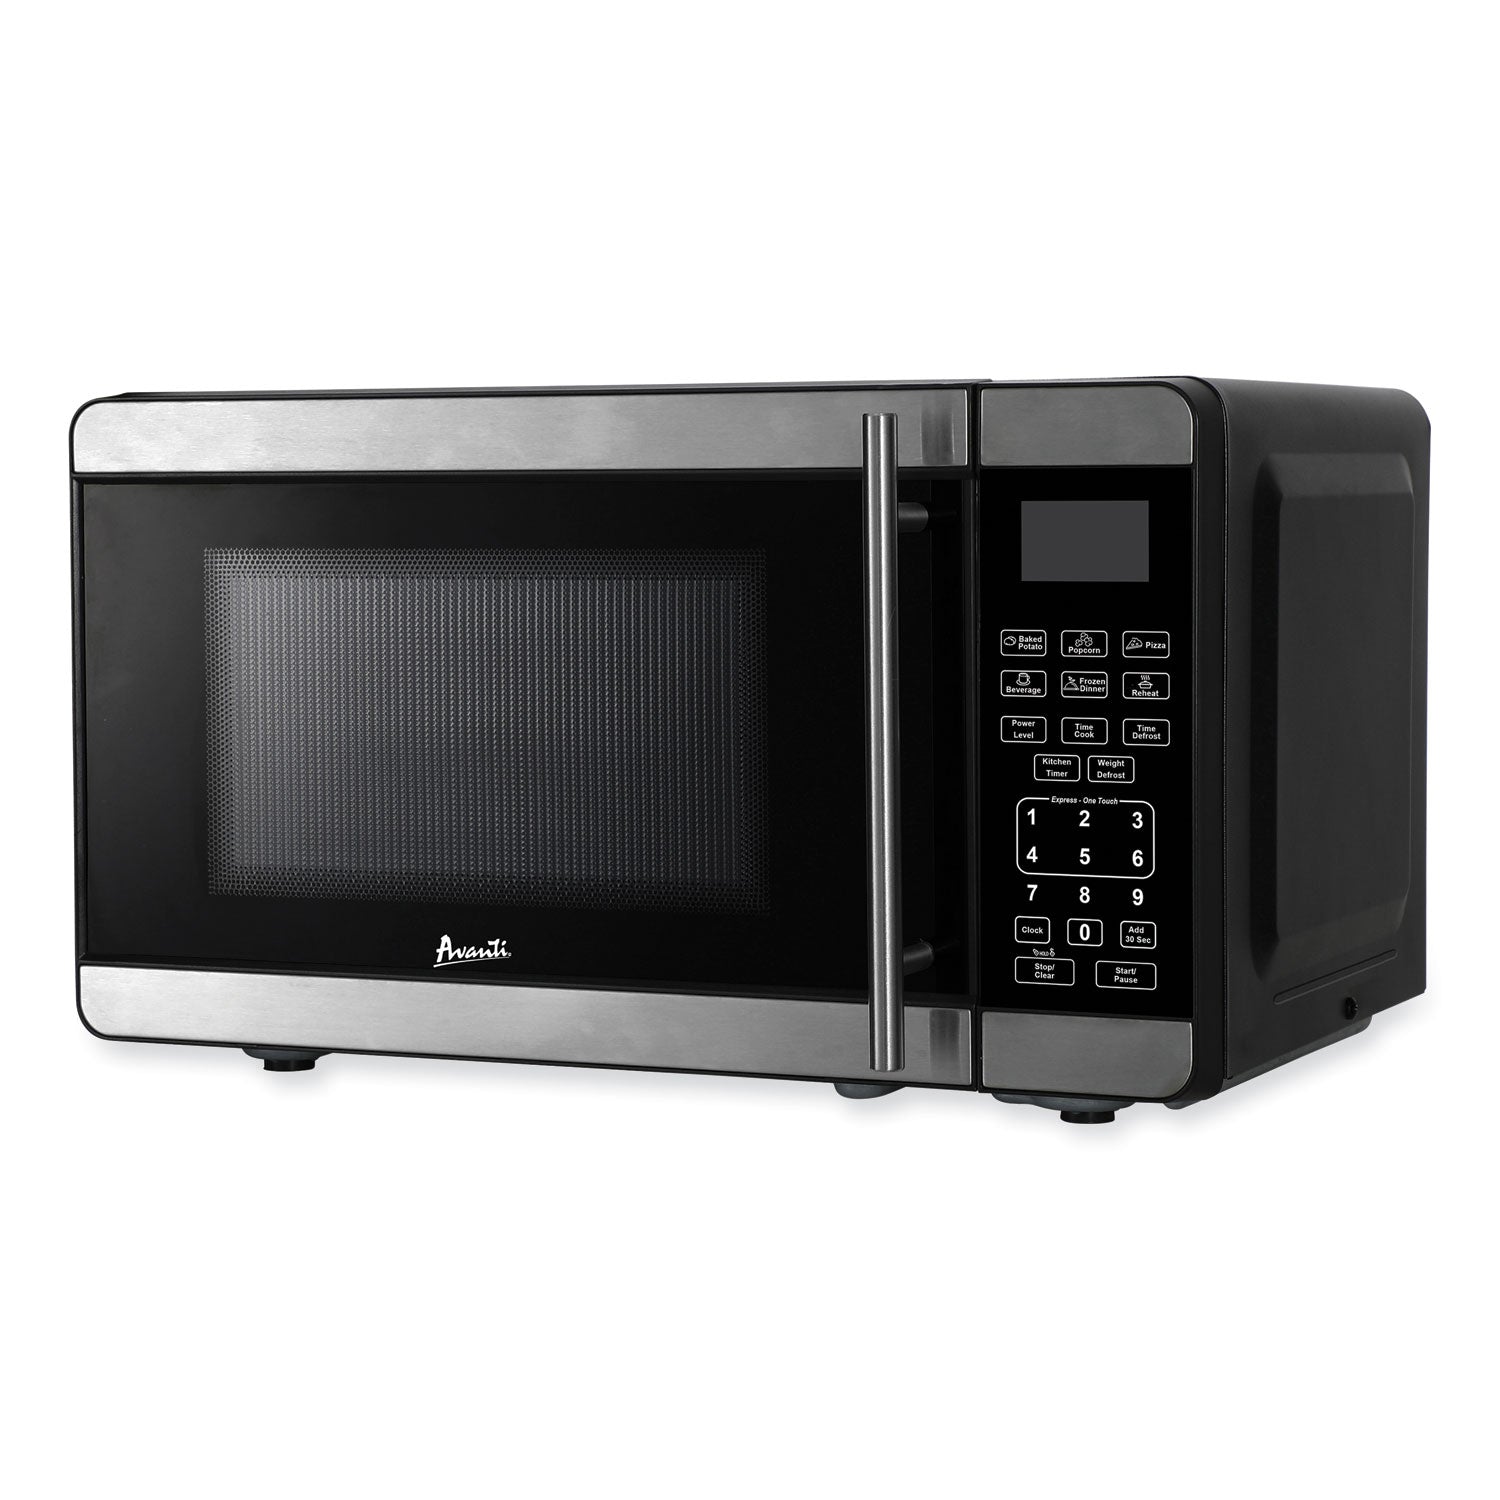 07-cubic-foot-microwave-oven-700-watts-stainless-steel-black_avamt7v3s - 3